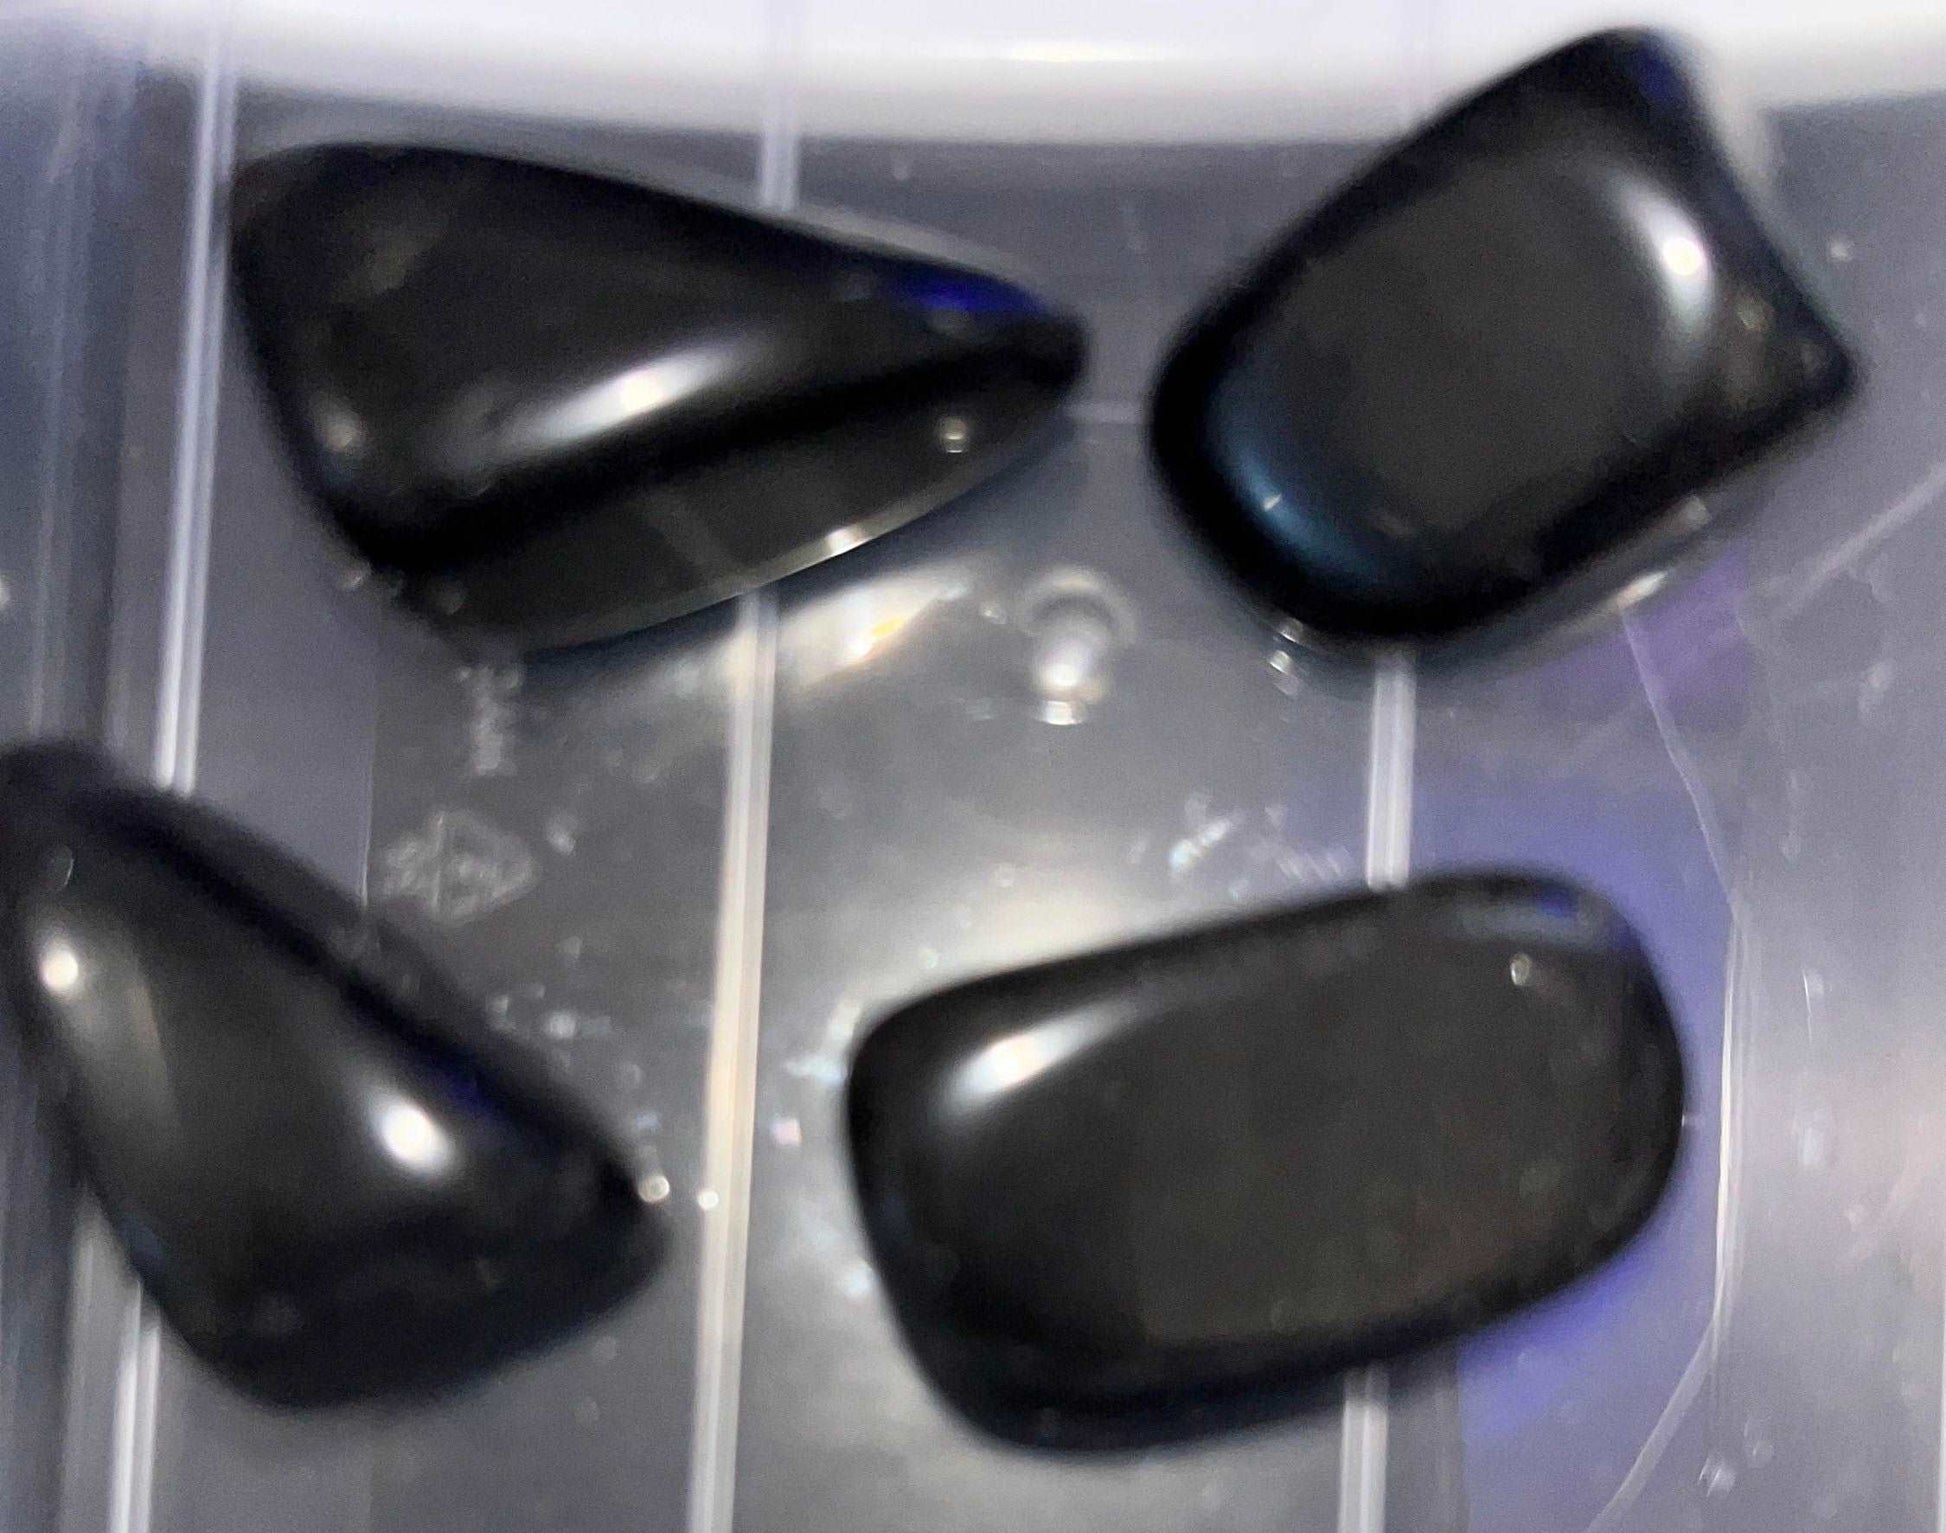 Black Obsidian tumbles- Protection, releasing negativity, draw out stress and tension